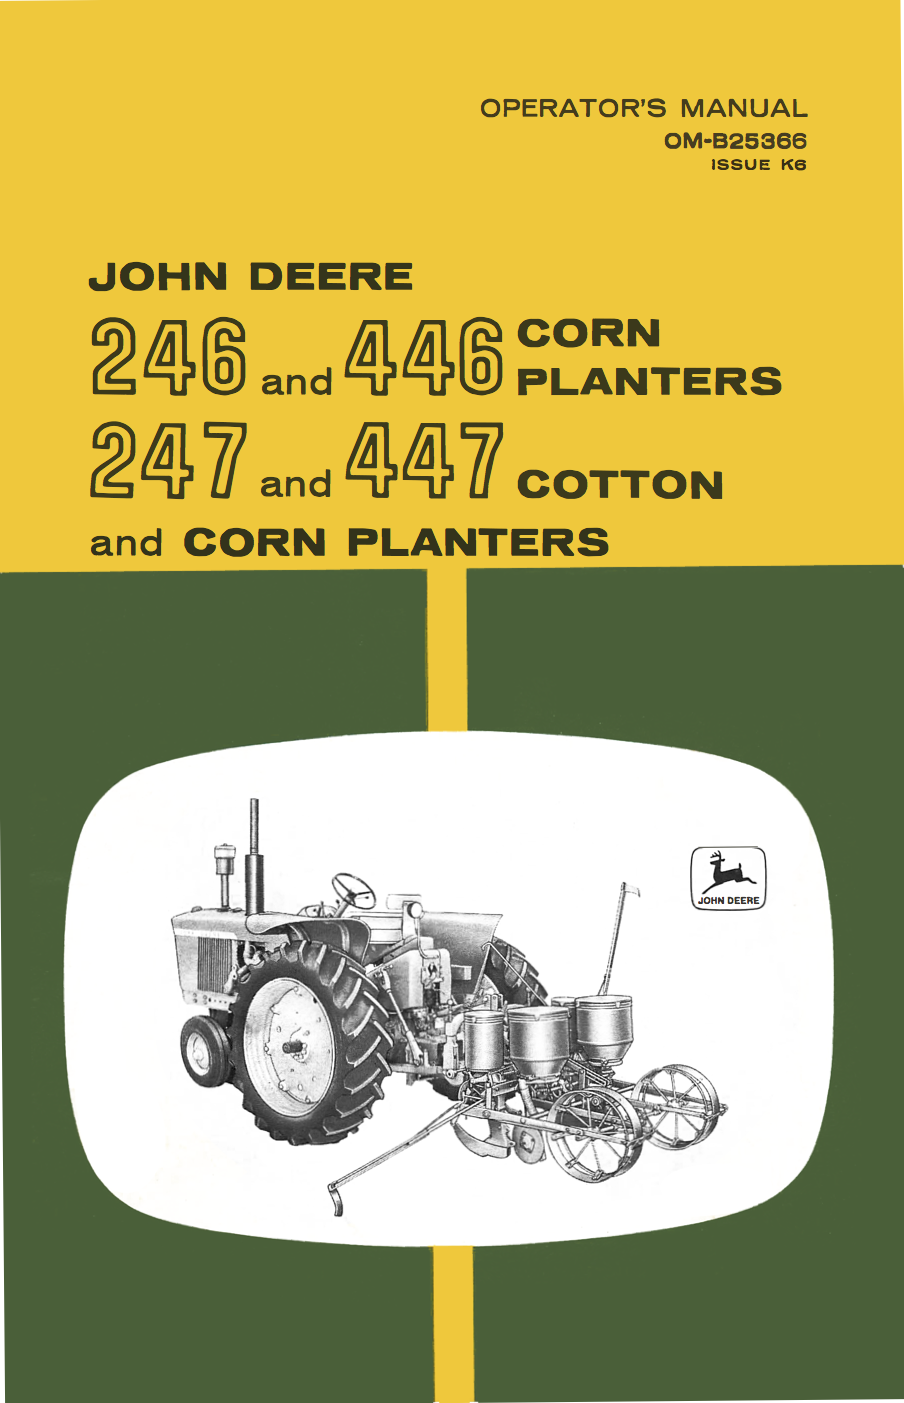 John Deere 246 and 446 Corn Planter | 247 and 447 Cotton Planters - Operator's Manual - Ag Manuals - A Provider of Digital Farm Manuals - 1